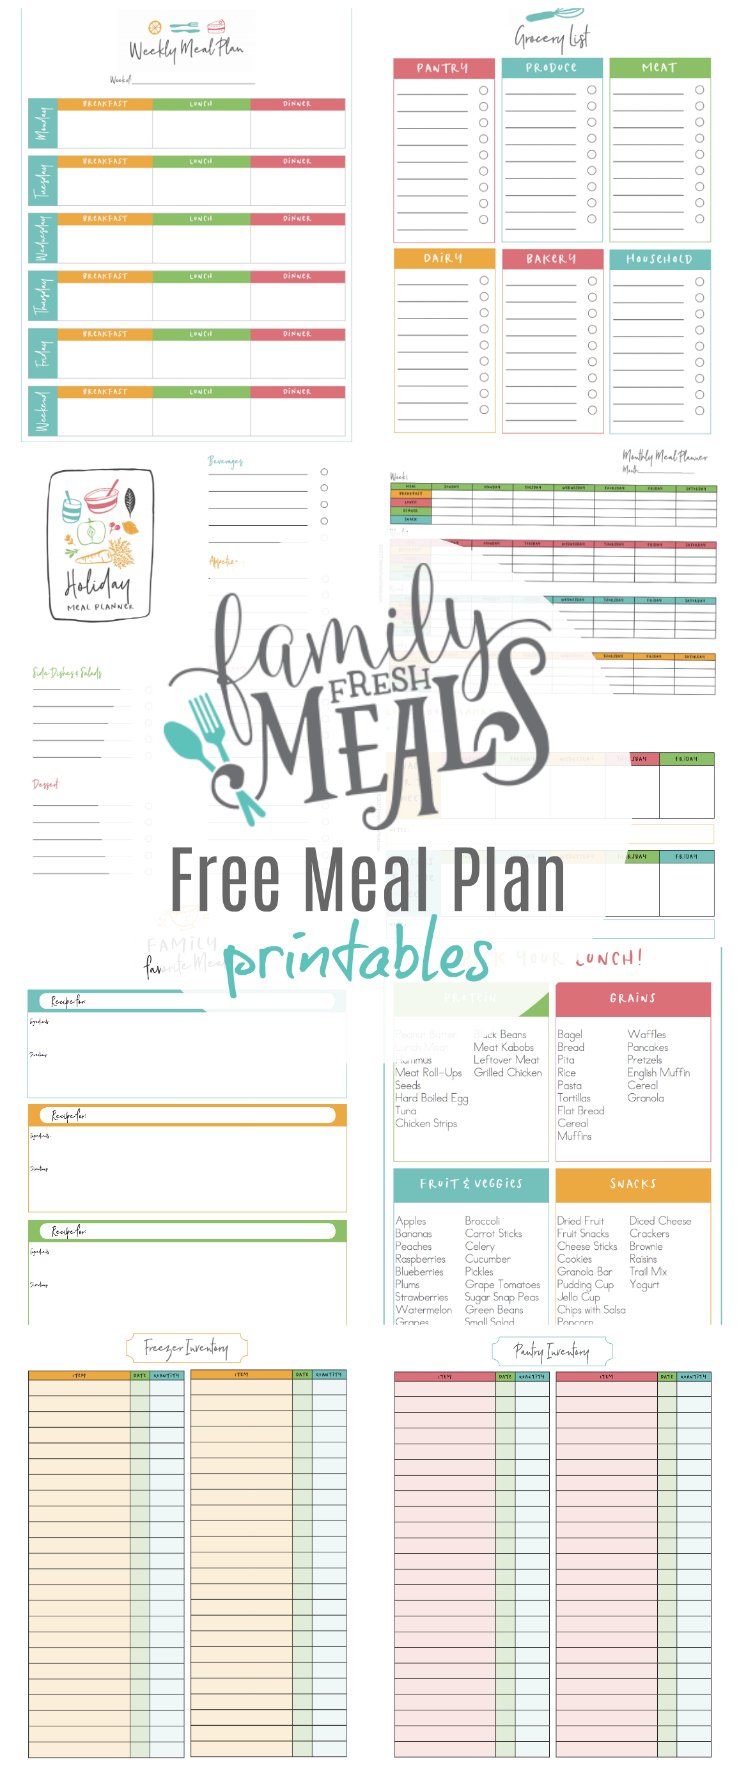 Free Meal Planning Template from www.familyfreshmeals.com